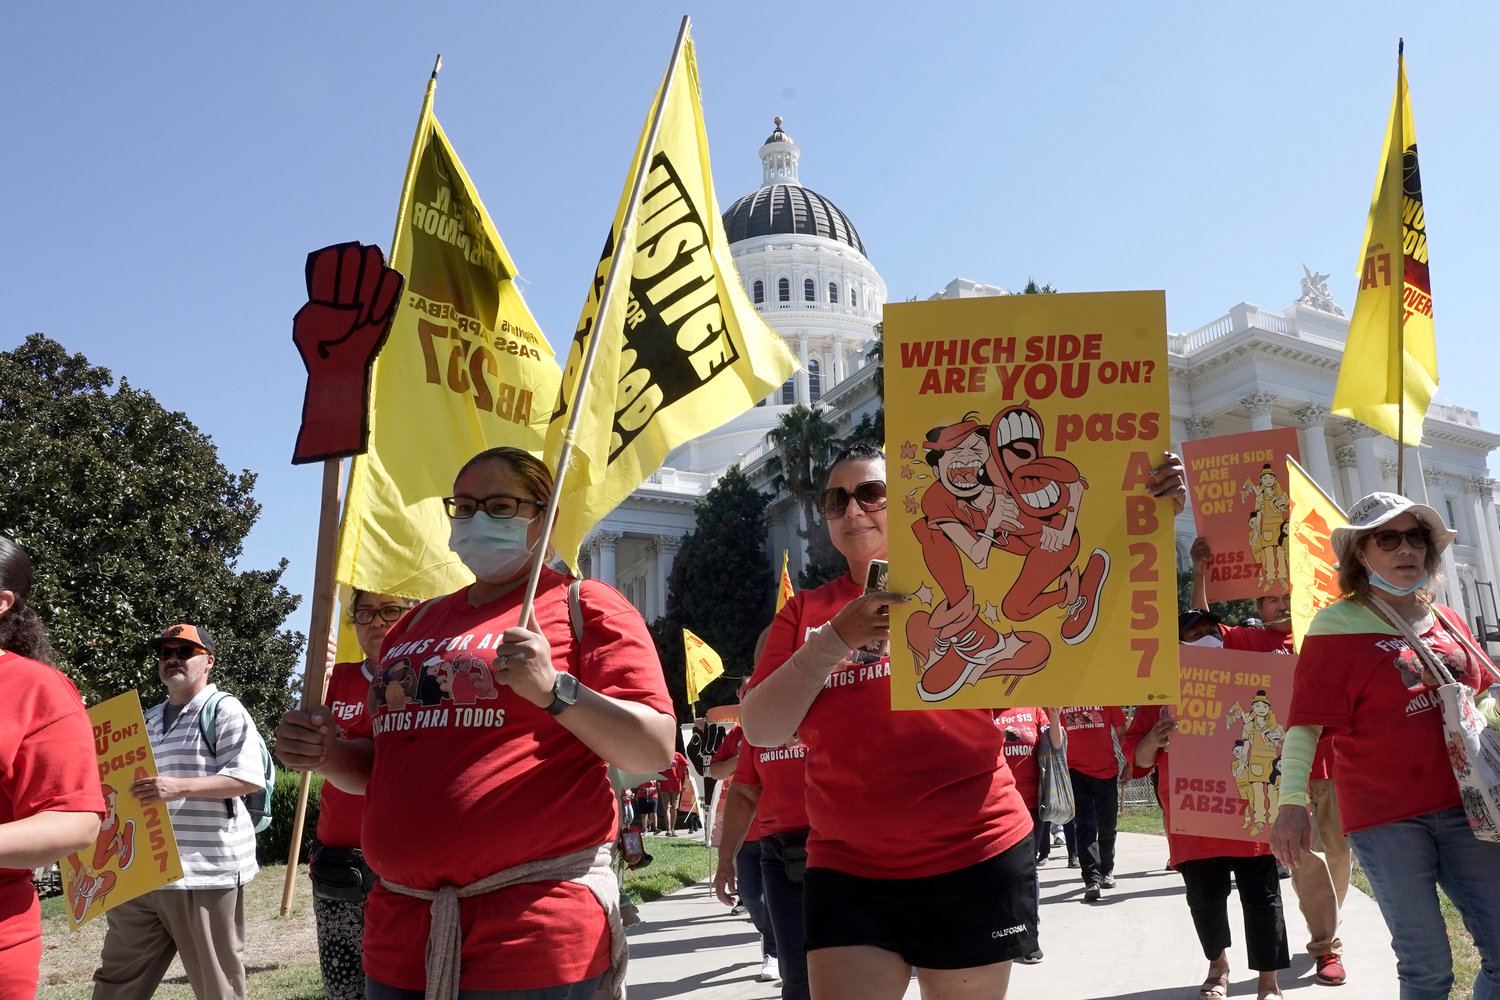 Fast food workers marched past the California state Capitol in Sacramento Aug. 16 calling on the passage of the Fast Food Accountability and Standards Recovery Act, which will provide increased power to fast food workers.